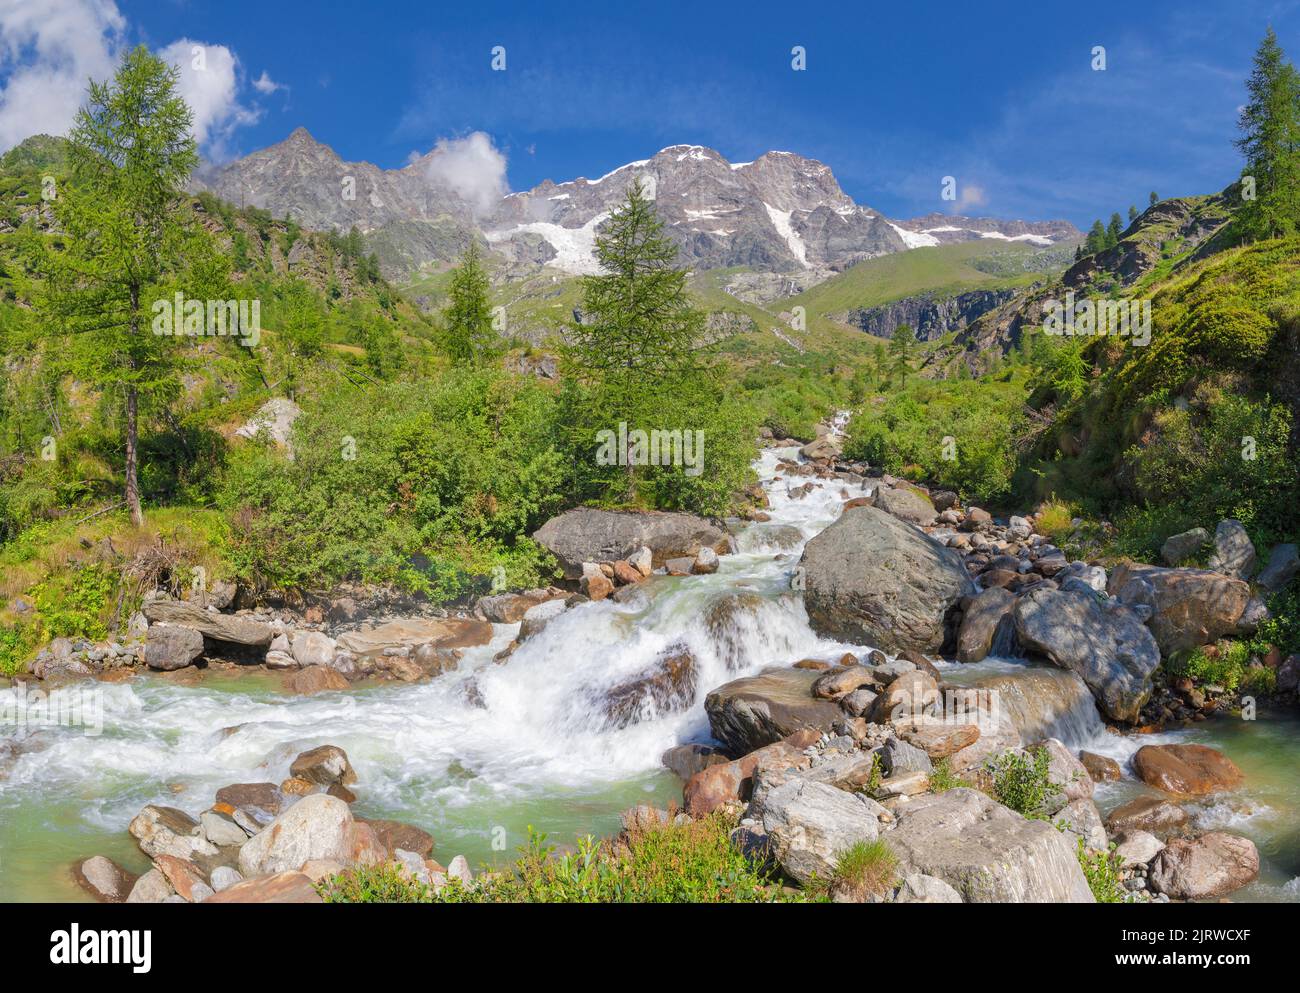 The panorama of peaks Punta Gnifetti or Signalkuppe, Parrotspitze, Ludwigshohe - Valsesia valley. Stock Photo